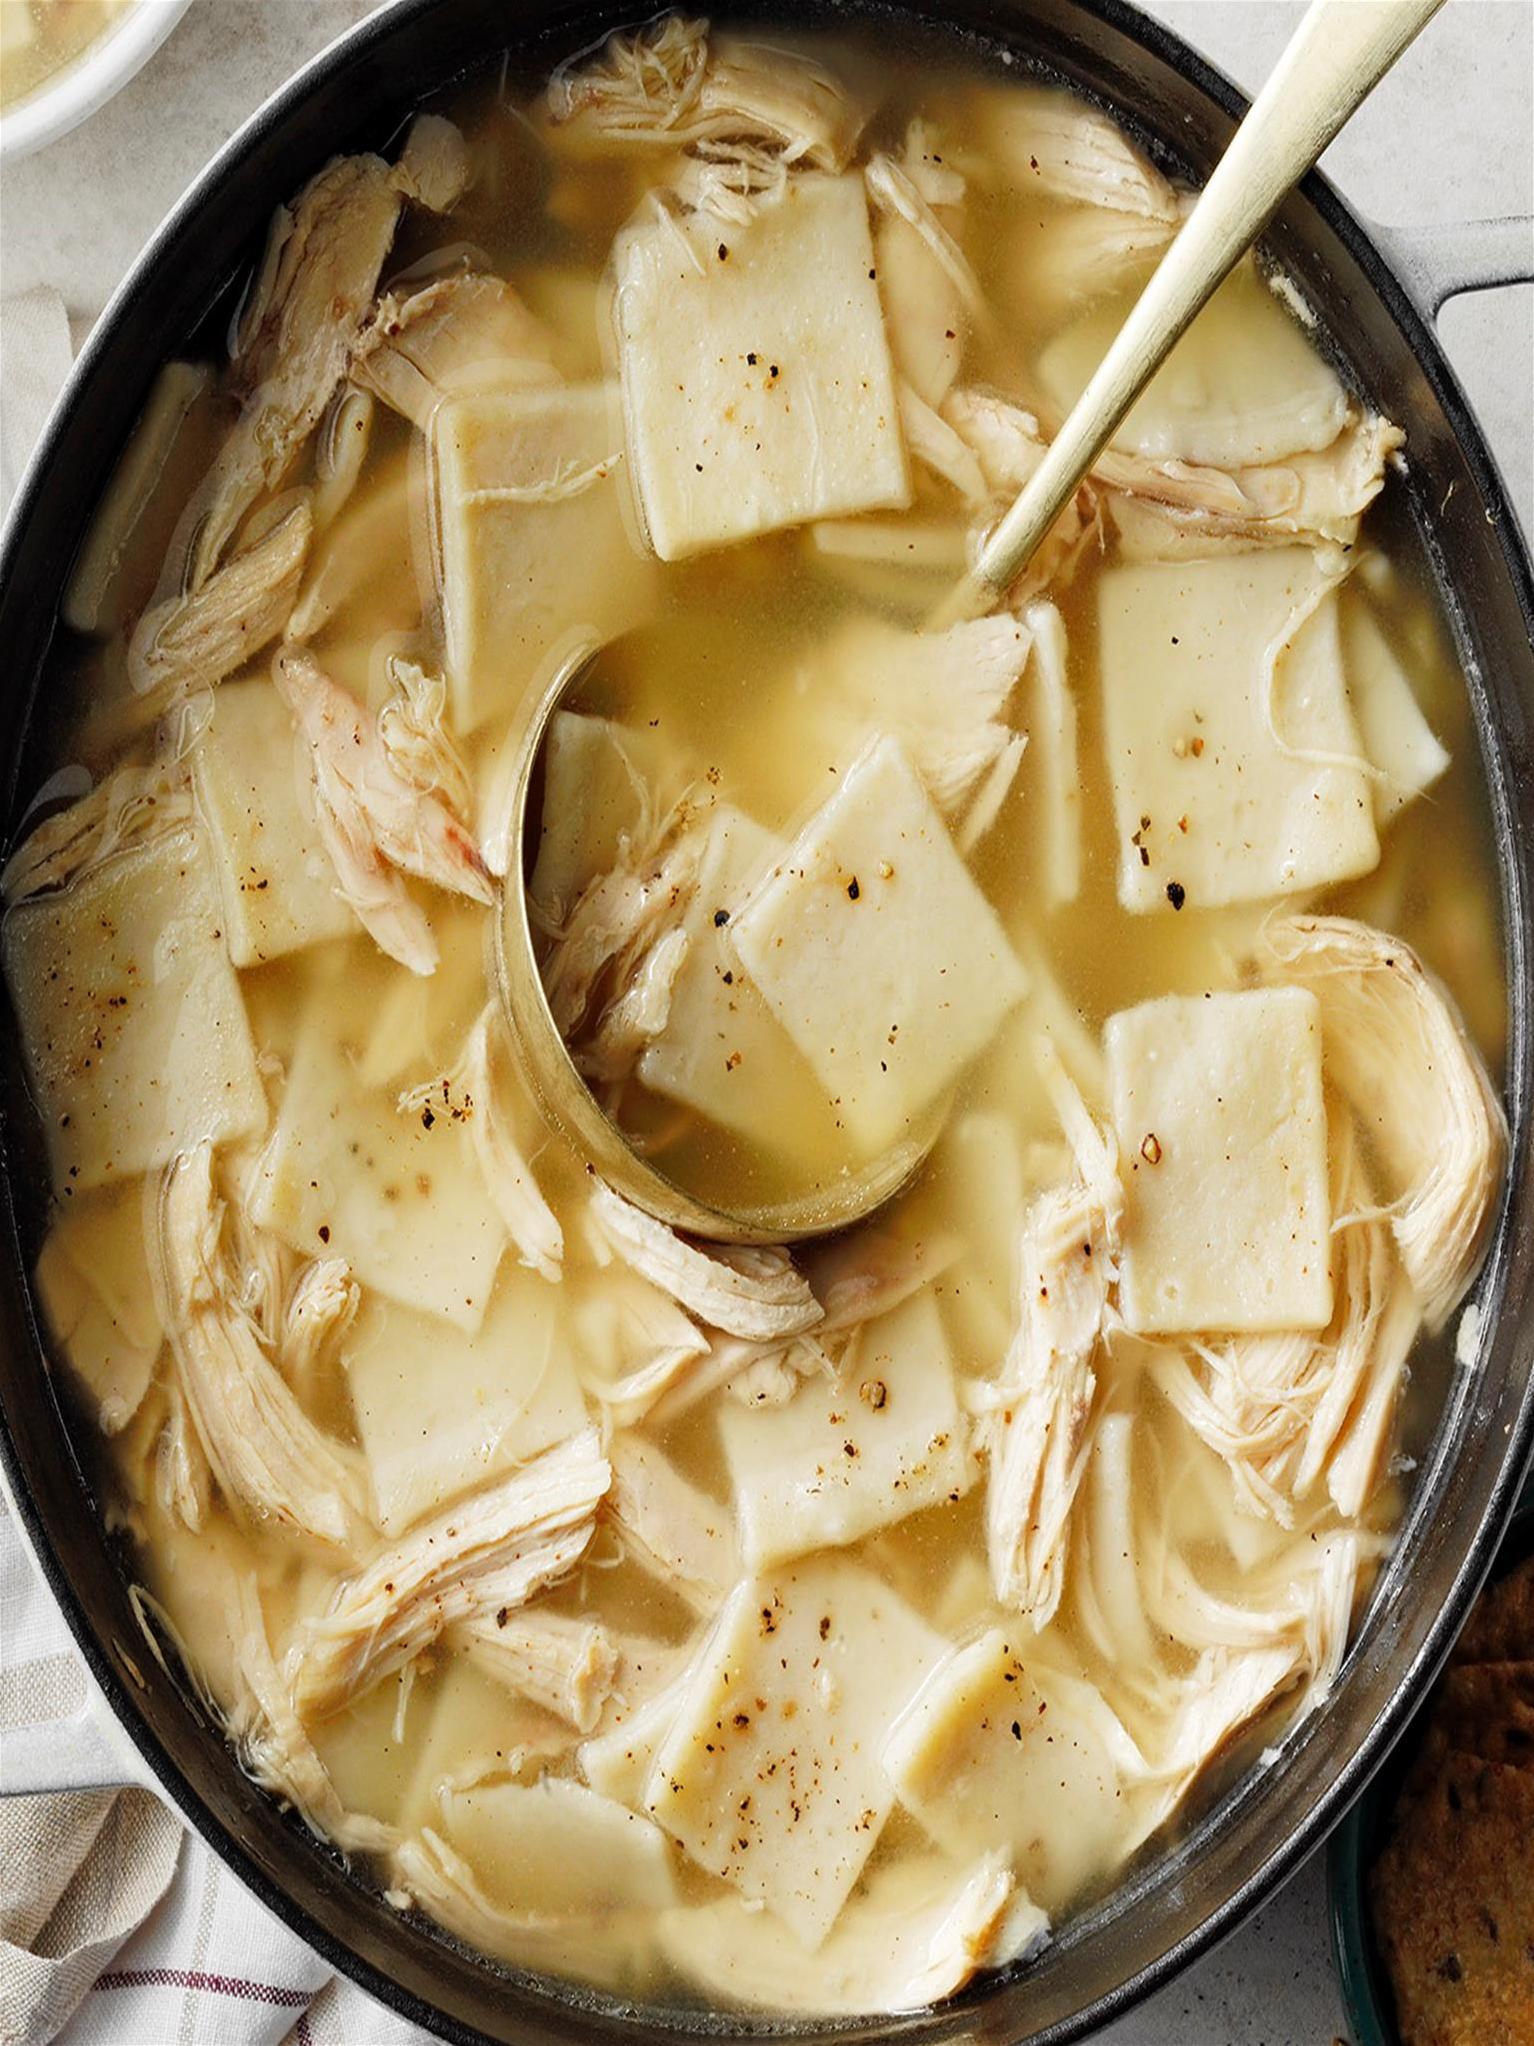  Creamy broth, tender chicken, and fluffy dumplings - what could be better?